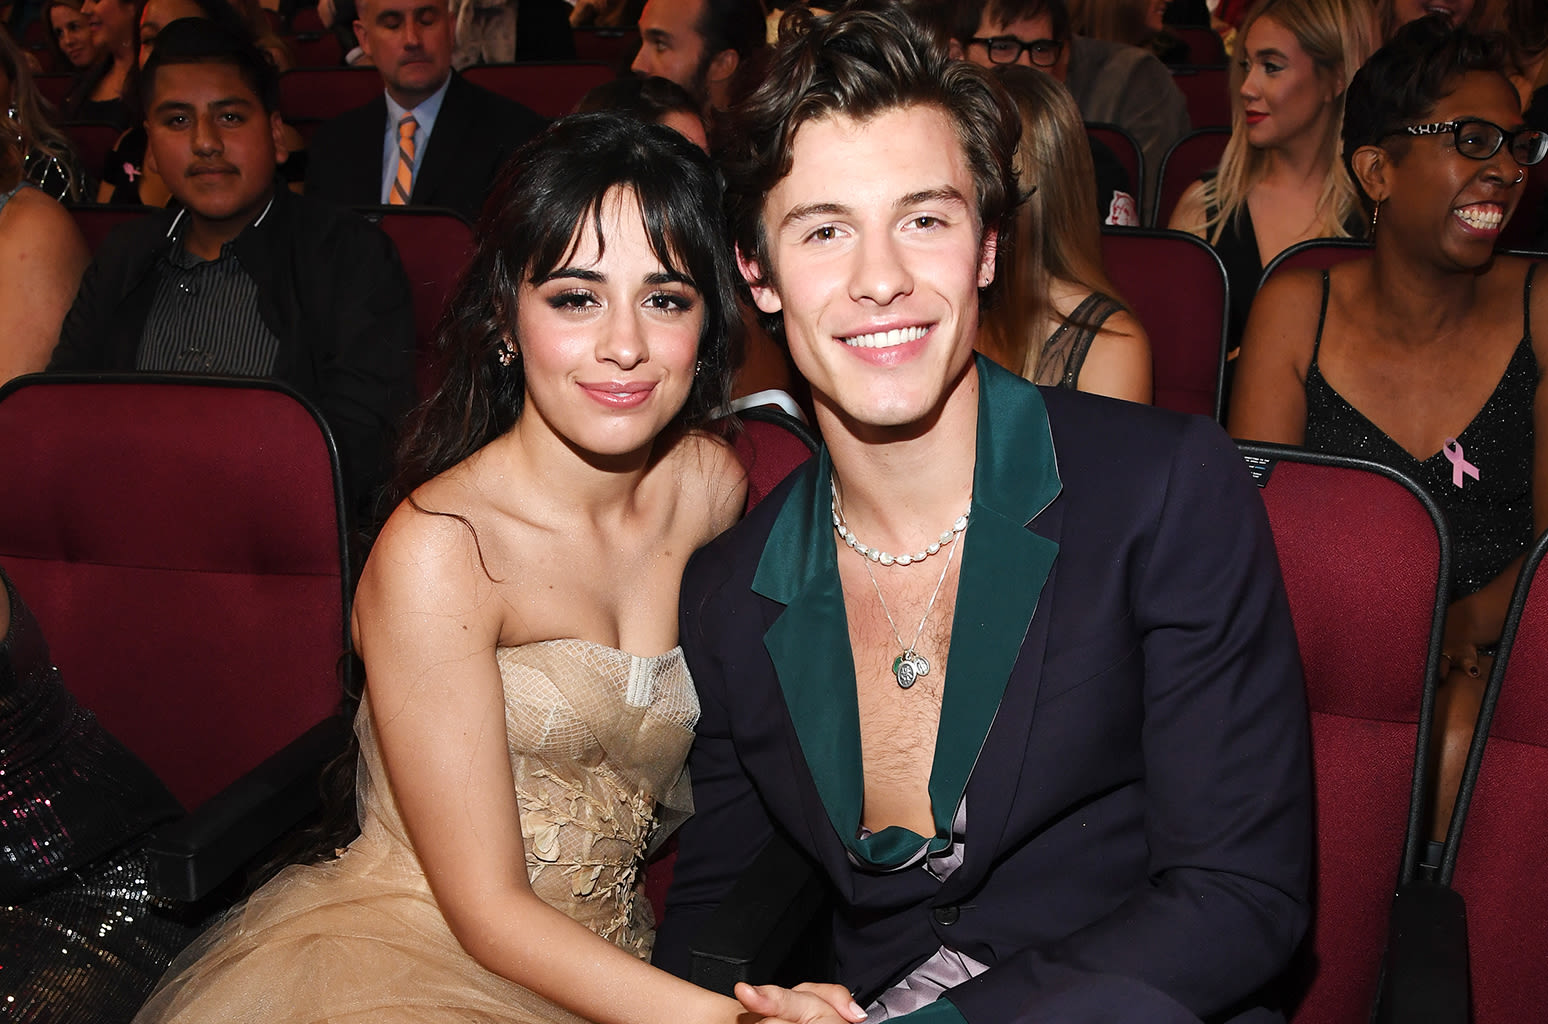 Camila Cabello Worried Shawn Mendes Duet ‘Señorita’ Could Make the ‘Couple Thing’ Her ‘New Identity’